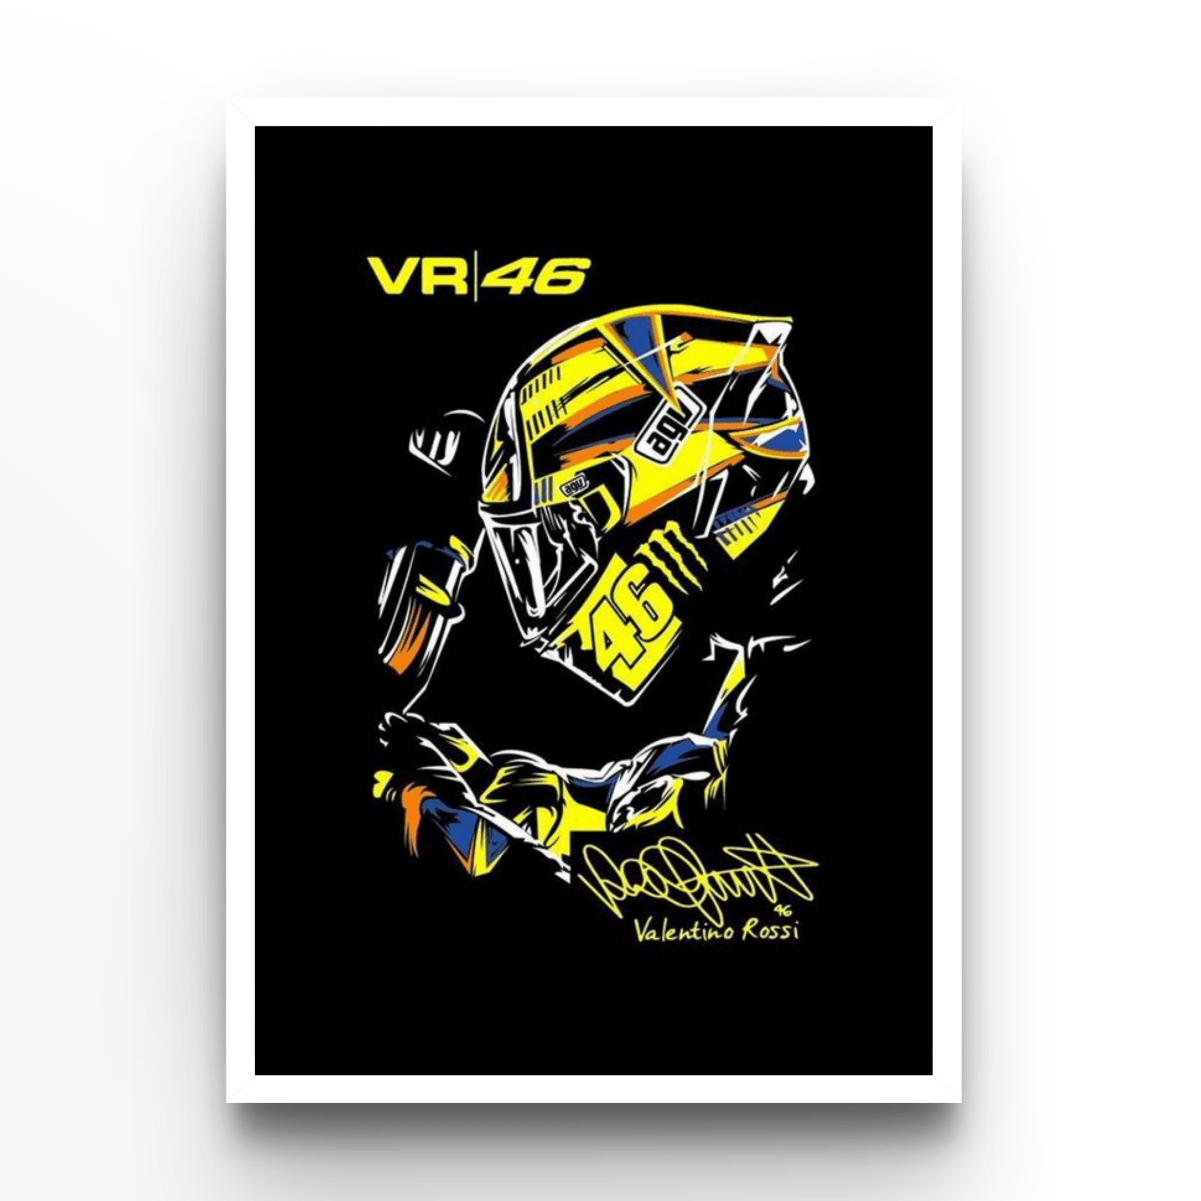 Valentino Rossi 2 - A4, A3, A2 Posters Base - Poster Print Shop / Art Prints / PostersBase